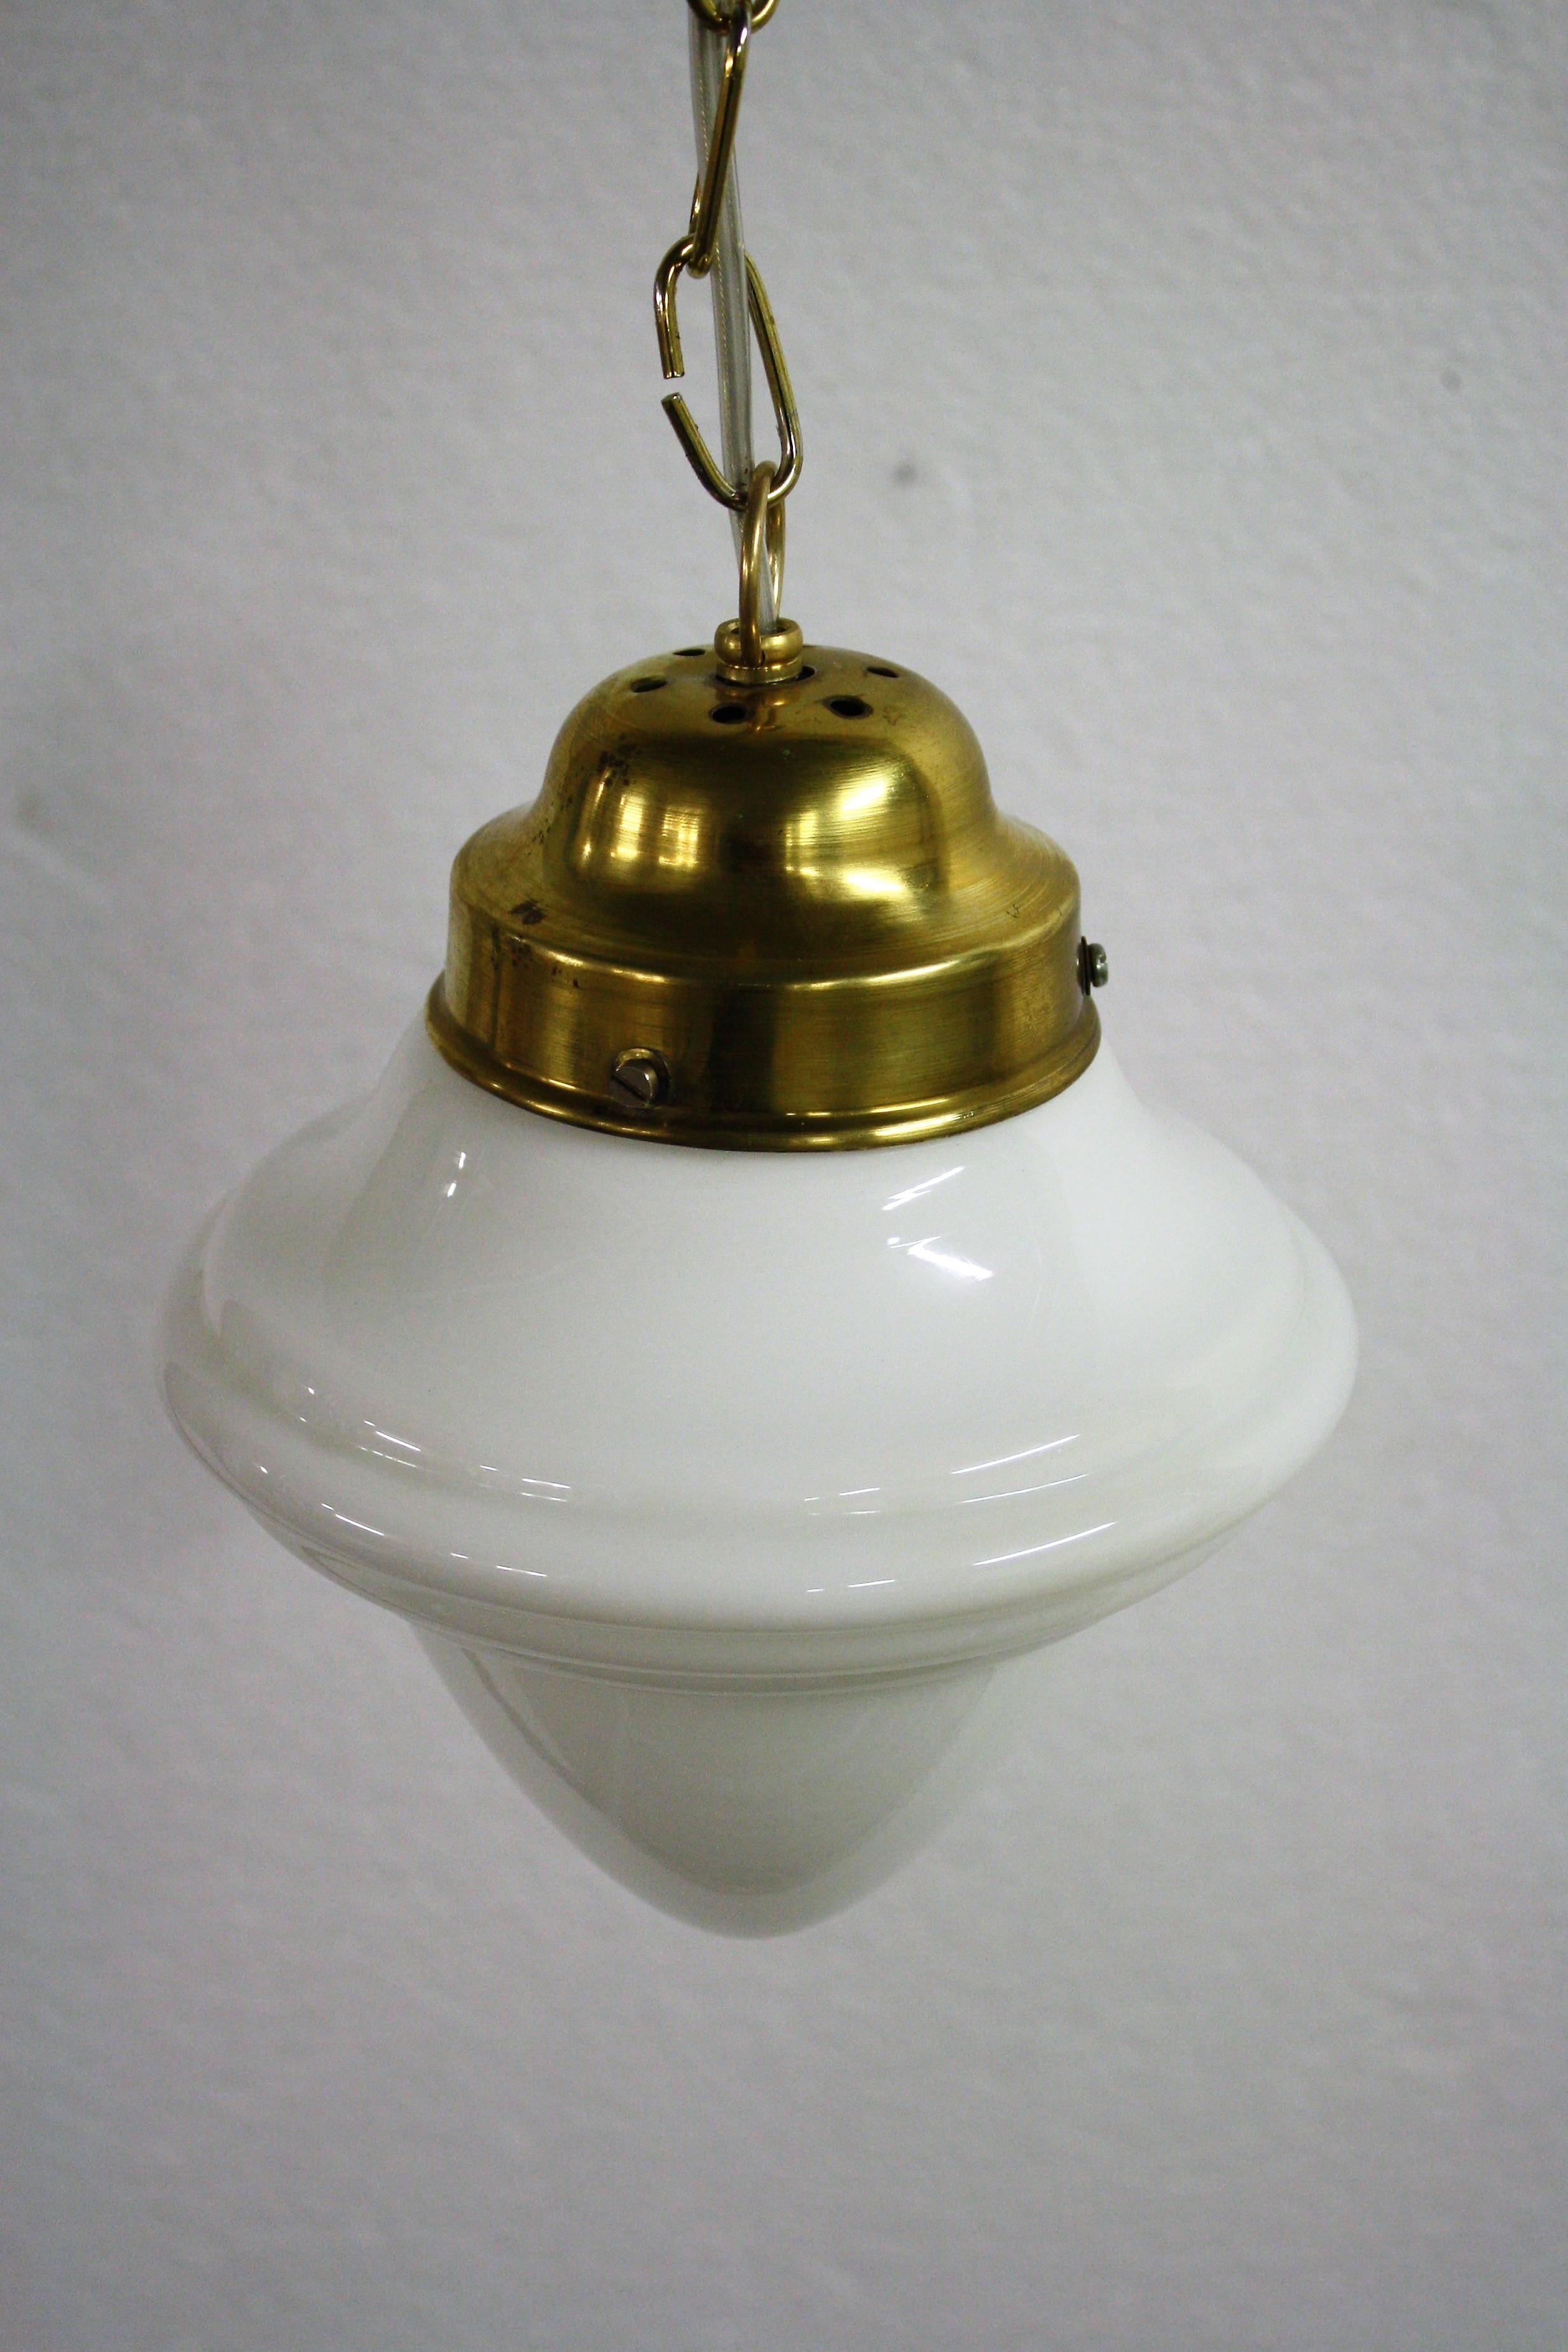 Antique Art Deco era opaline pendant light.

The lamp has a typical Art Deco design.

Supplied with a brass chain and shade holder.

Rewired, tested and ready to use with a regular E27 light bulb.

1930s, France

Measures: Height including